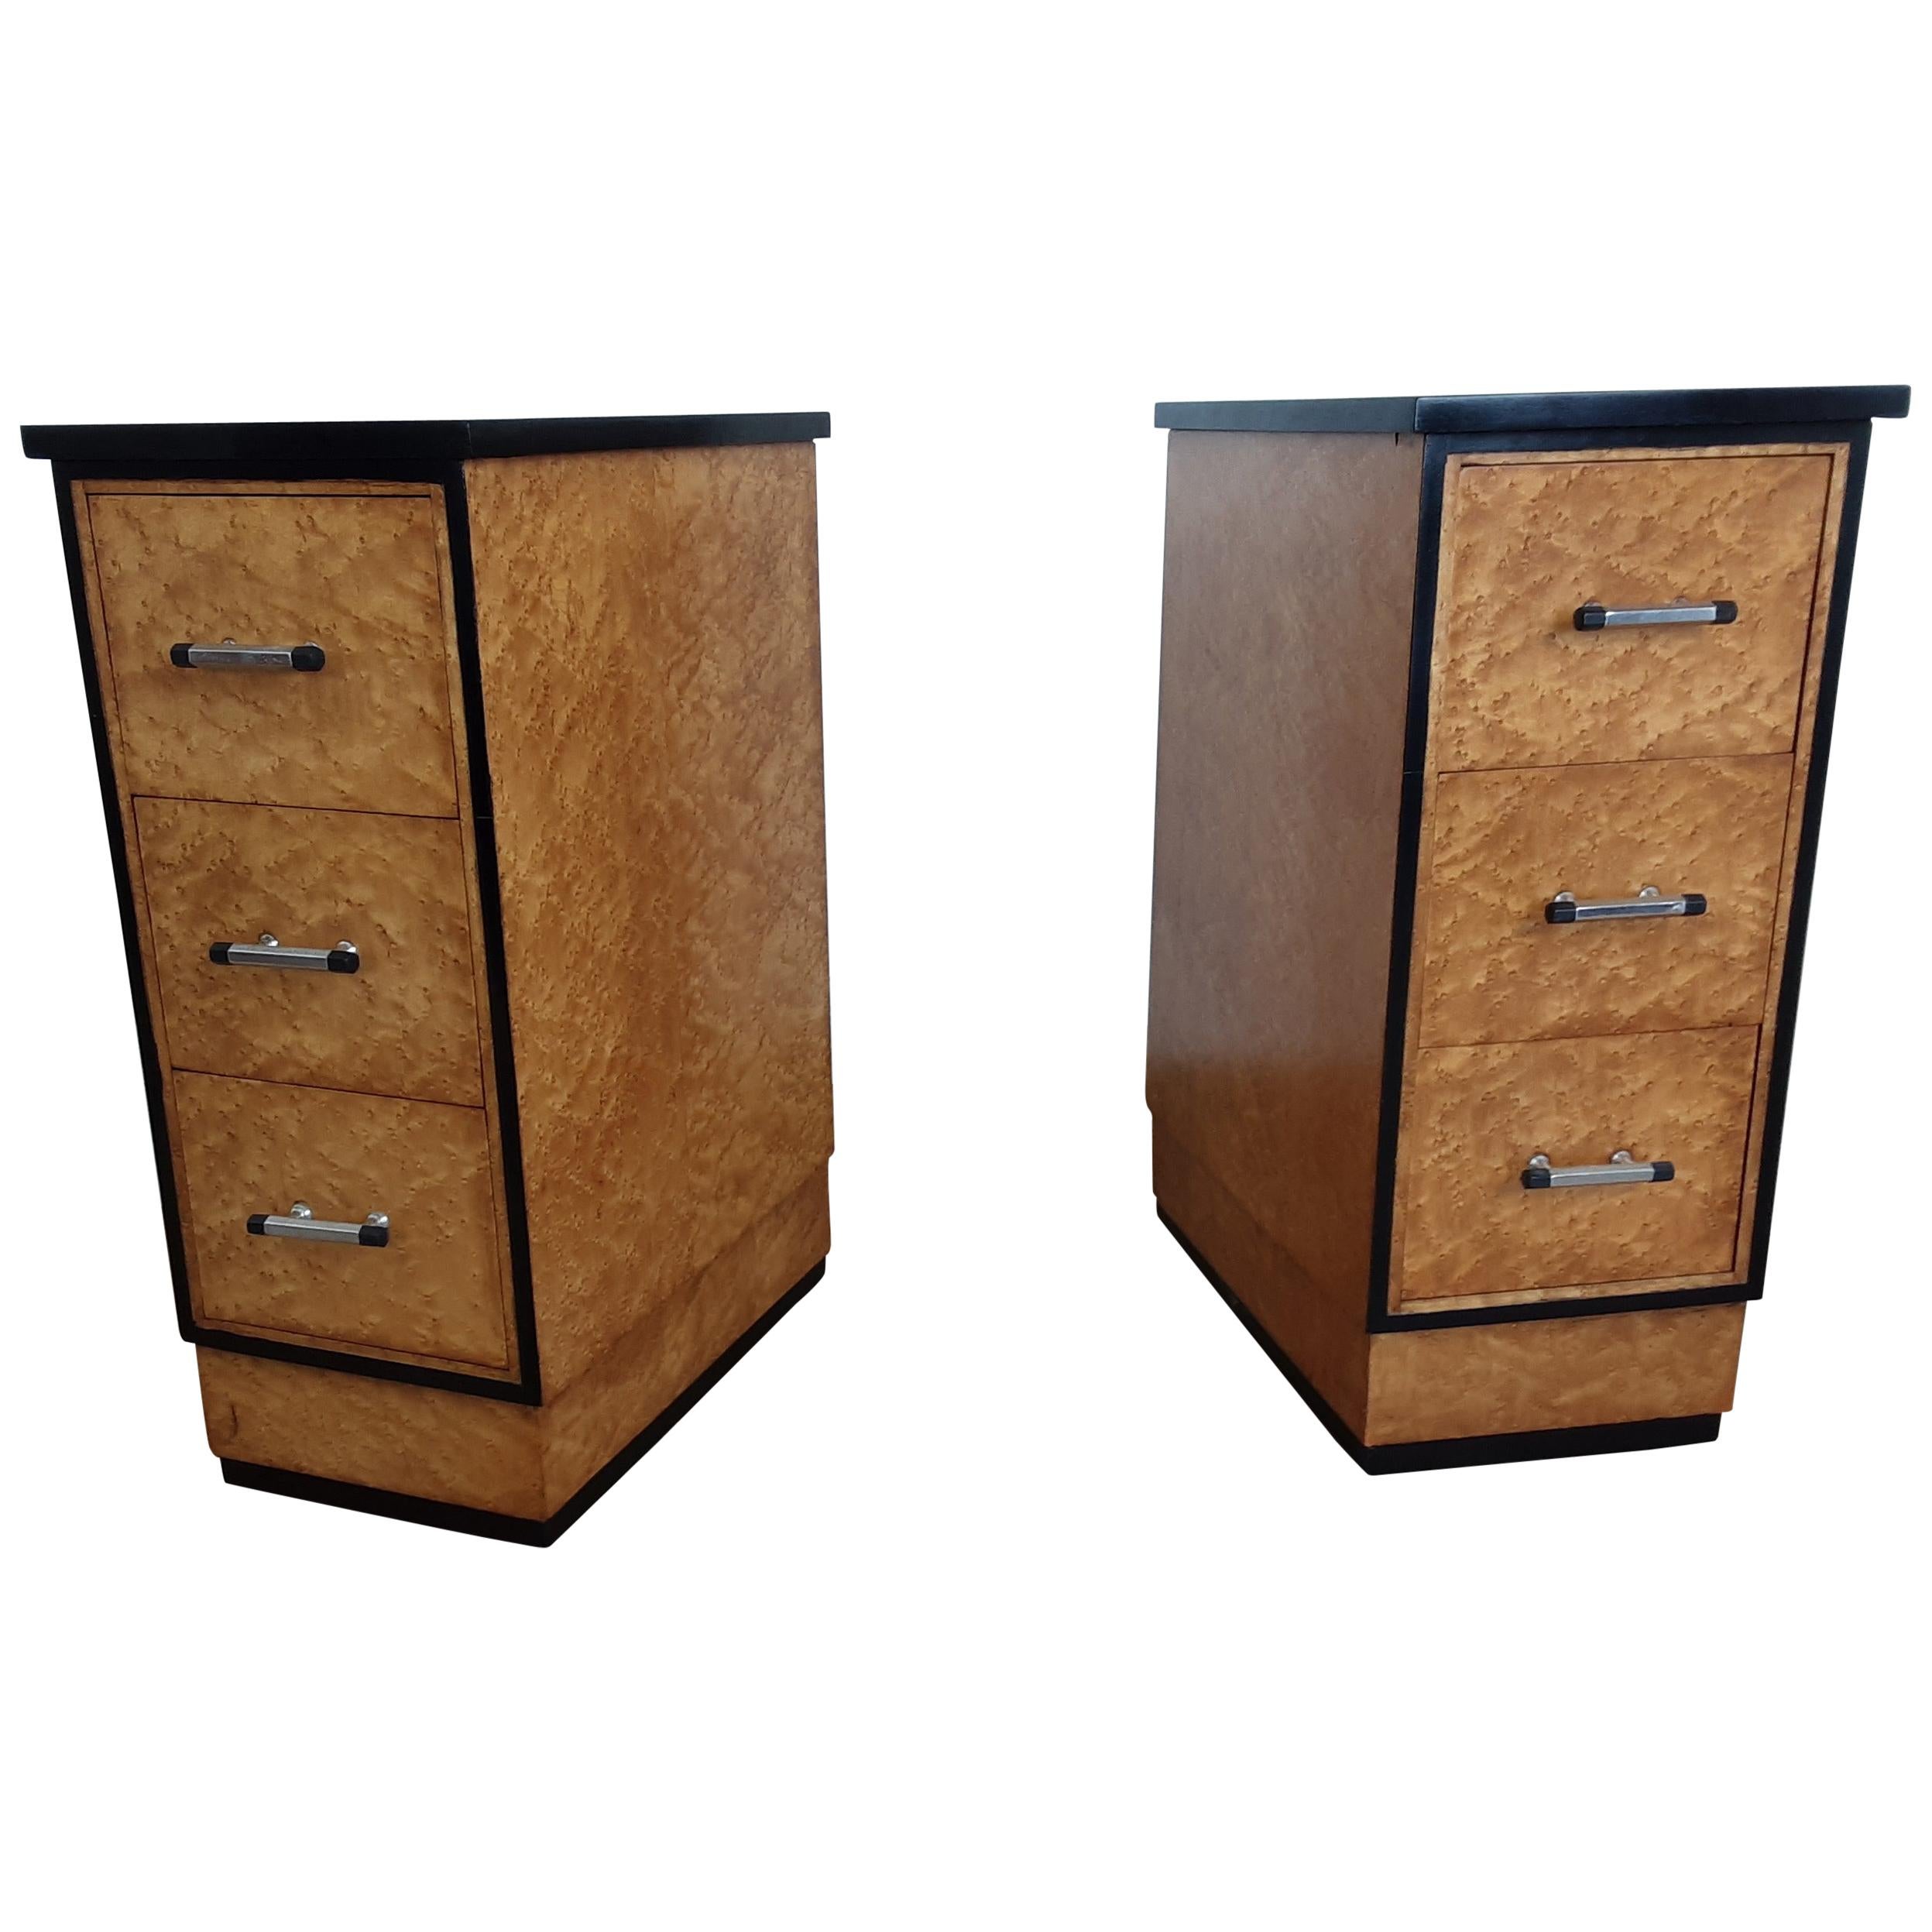 Pair of British Art Deco Bedside Cabinets by Epstein in Birdseye Maple, 1930s